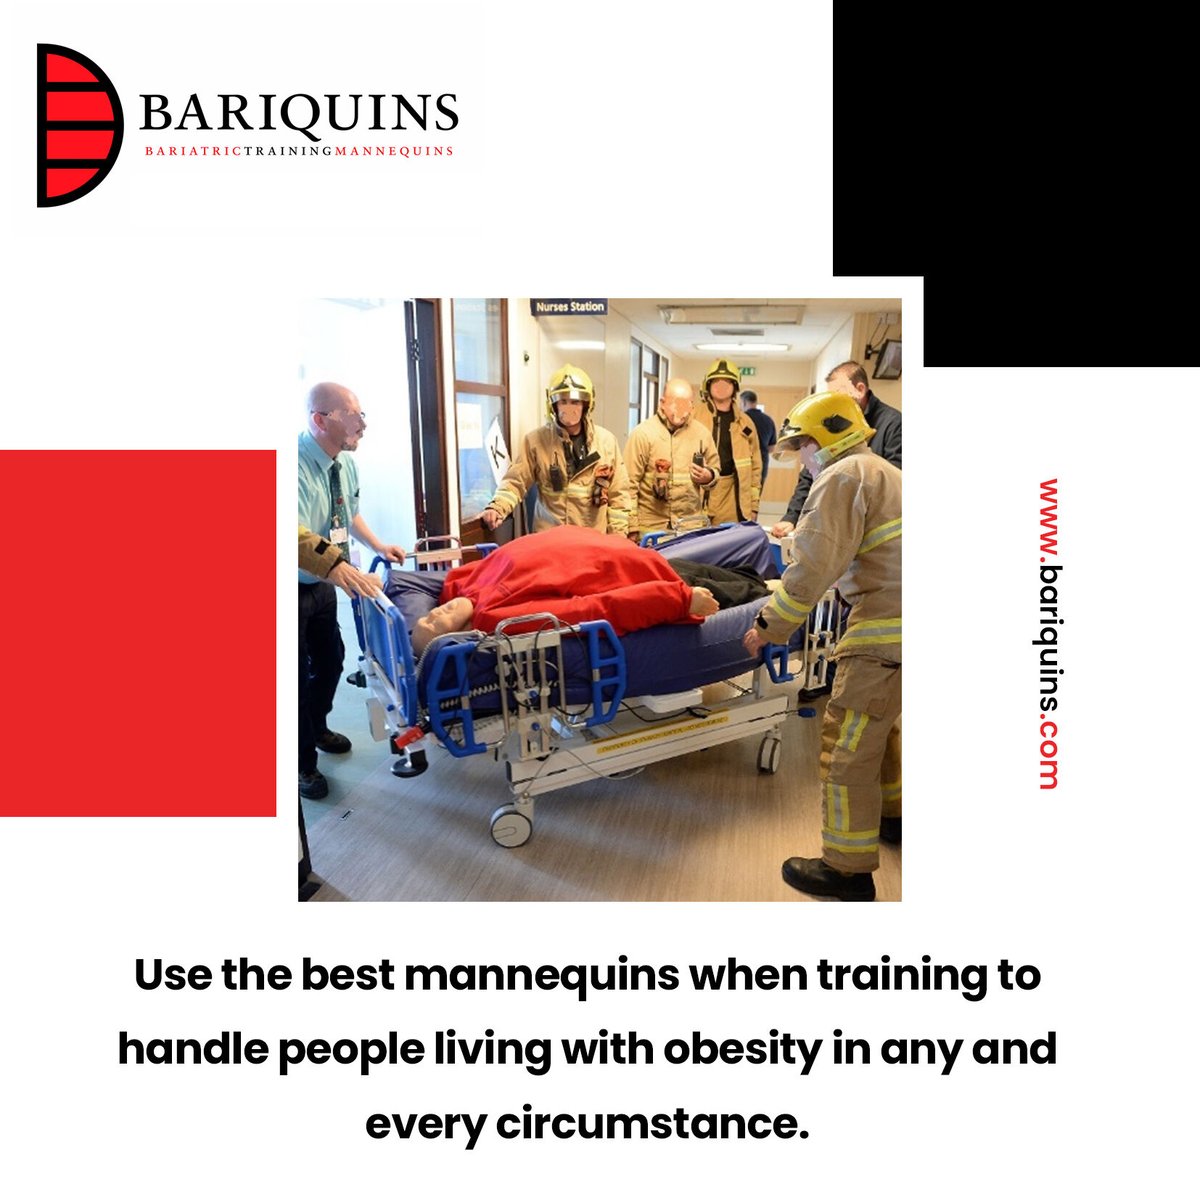 Quality realistic #bariatrictraining at https://t.co/MLKRqzkFLF with bulk/weight/look of a person living with #obesity Limbs flex like real #Fire #Paramedic #Ambulance #NHS #Nurses #Police #HART #Firefighter #Hospital #Bariatric #Patient #Training #HealthAndSafety #Rescue #EMS https://t.co/71gfQMeJG7